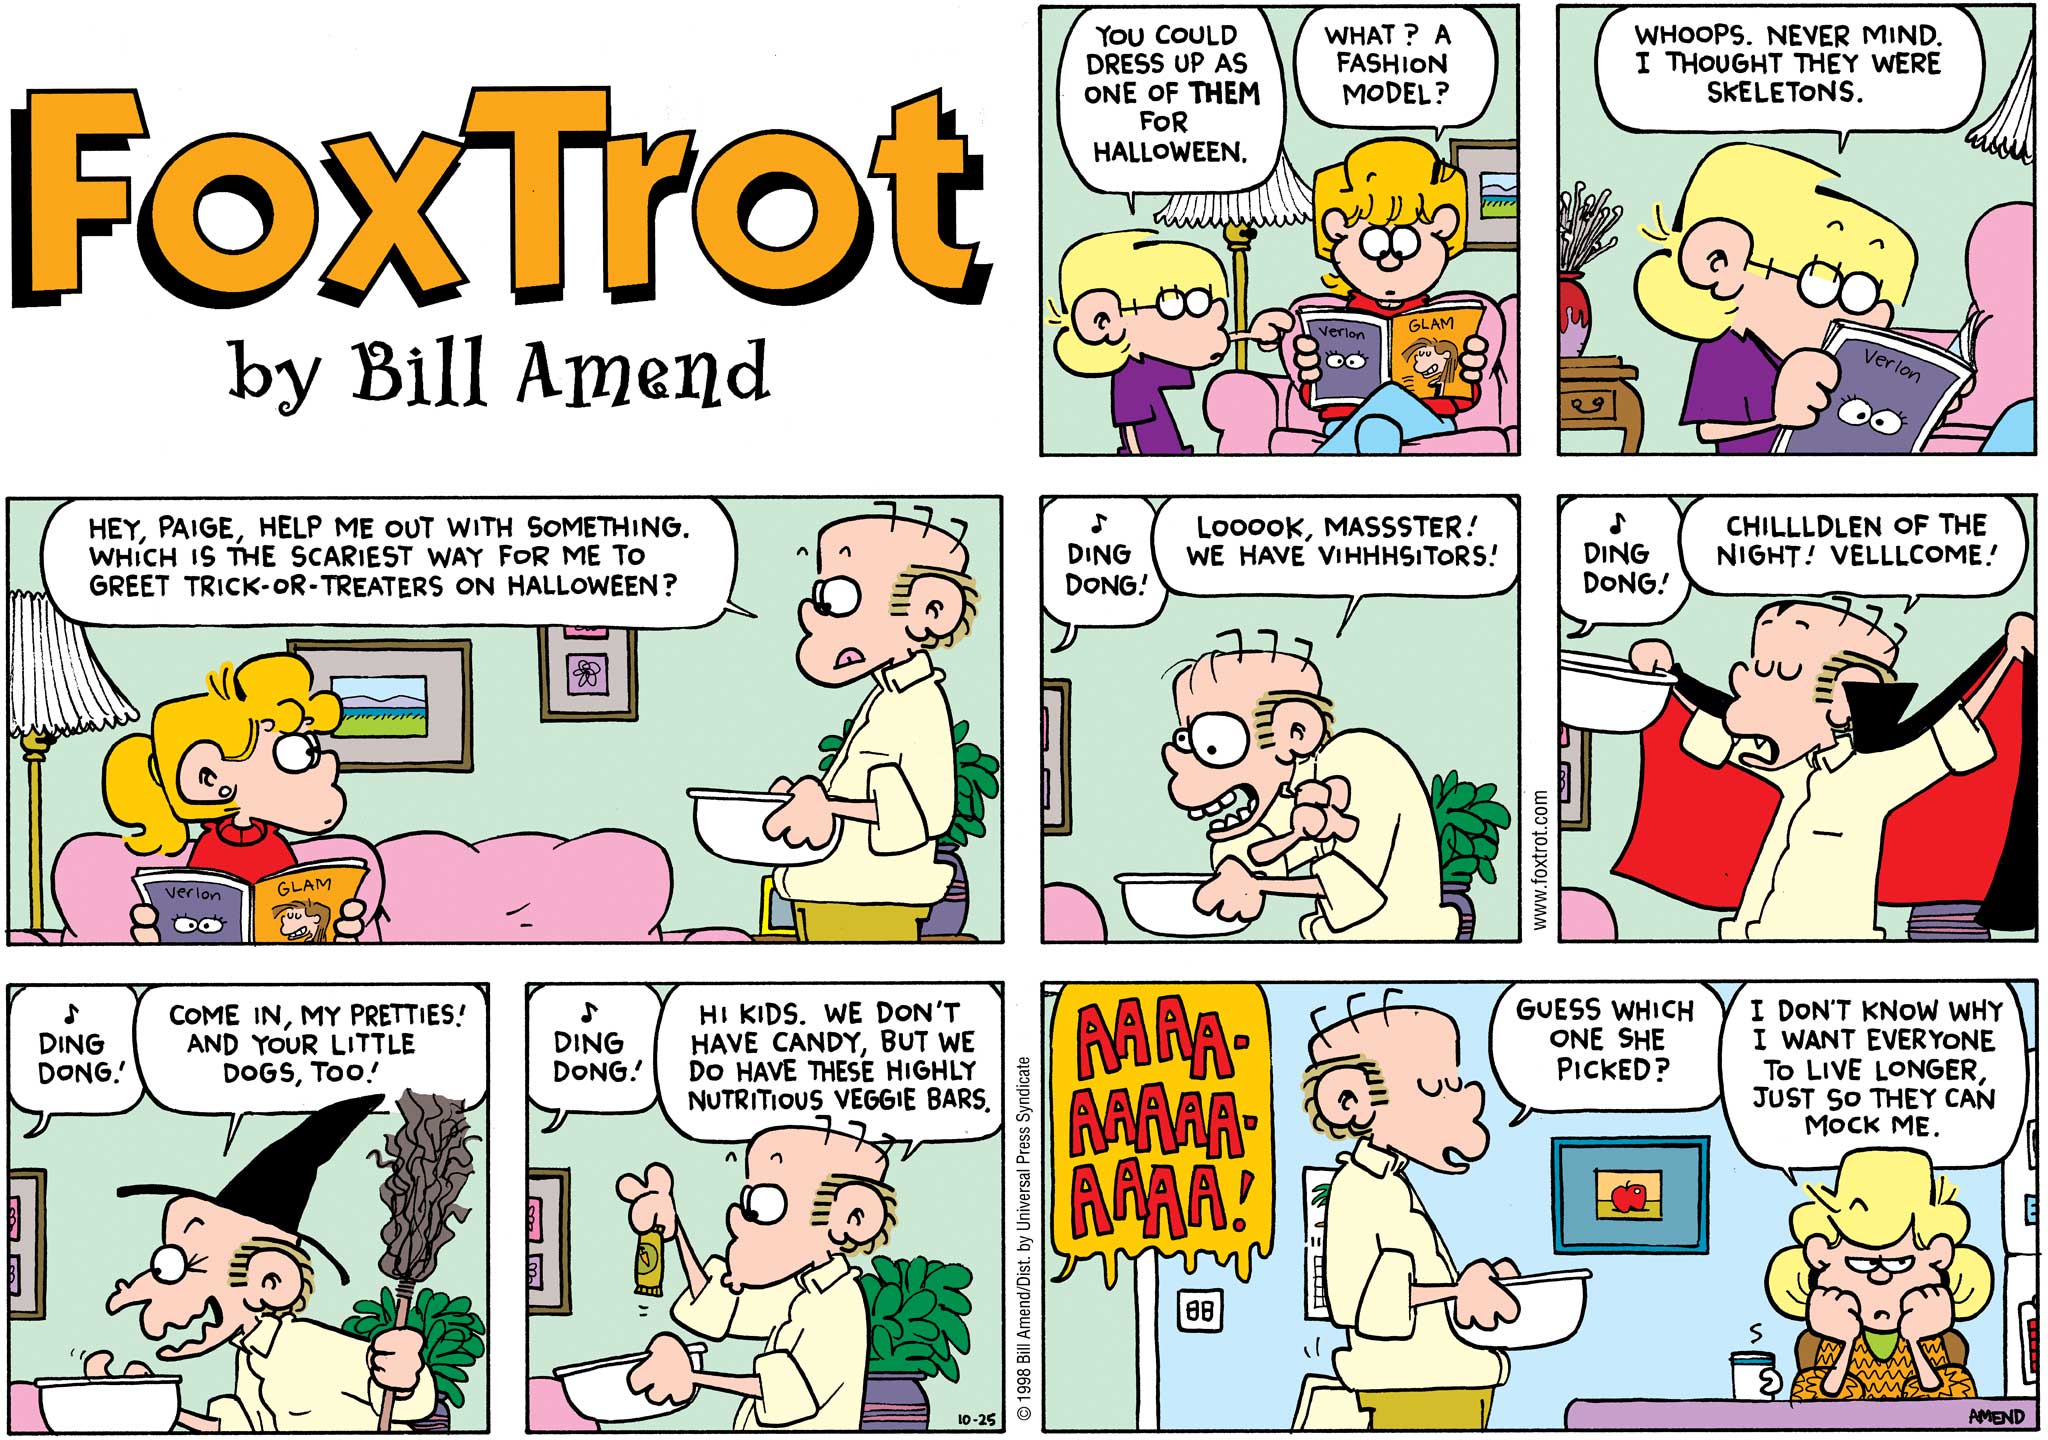 Halloween Comics - FoxTrot comic strip by Bill Amend - Published October 25, 1998 - Jason Fox: You could dress up as one of them for Halloween. Paige Fox: What? A fashion model? Jason Fox: Whoops. Never mind, I thought they were skeletons. Roger Fox: Hey, Paige, help me out with something. Which is the scariest way for me to greet tick-or-treaters on Halloween? Door bell: Ding dong! Roger Fox: Looook Masster! We have vihhhsitors! Door bell: Ding dong! Roger Fox: Children of the night! Vellllcome! Door bell: Ding dong! Roger Fox: Come in my pretties! And your little dogs, too! Door bell: Ding dong. Roger Fox: Hi kid, we don't have candy, but we do have these highly nutritious veggie bars. Paige Fox: Aaaaaaaaaaa Roger Fox: Guess which one she picked? Andy Fox: I don't know why I want everyone to live longer, just so they can mock me.